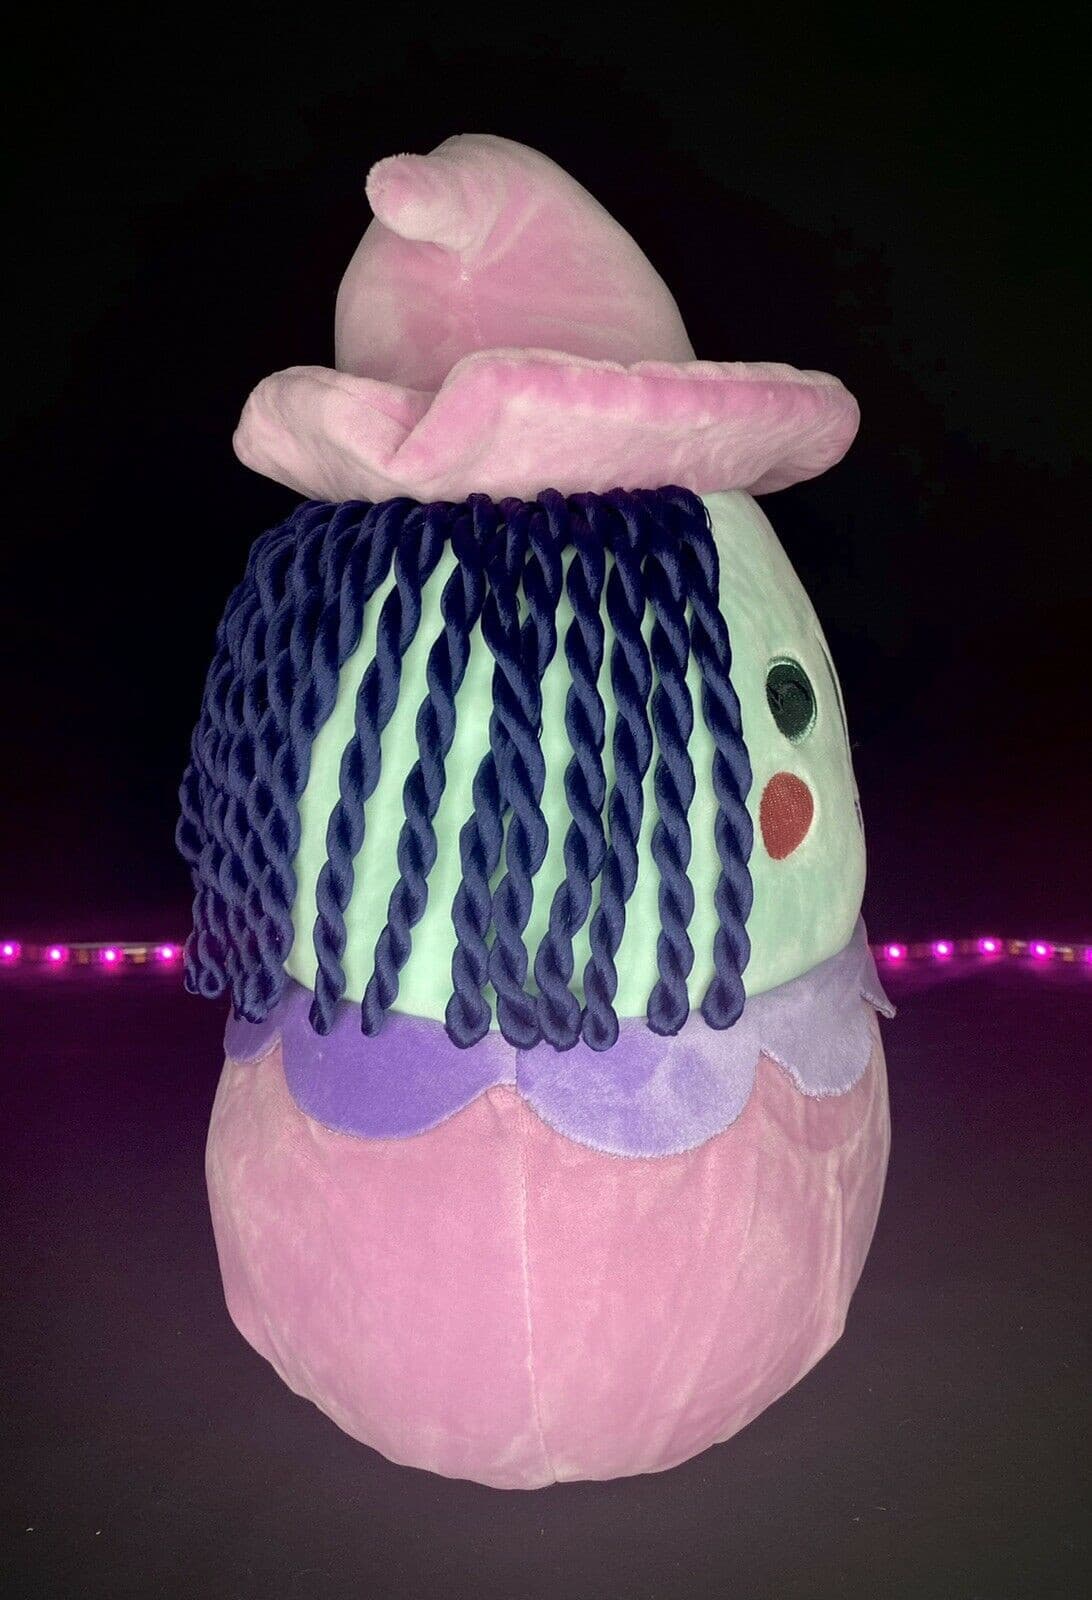 Squishmallows Nightmare Before Christmas 12" SHOCK NWT 2021 HTF OOGIE BOOGIE BOY | Sweet Magnolia Charms.